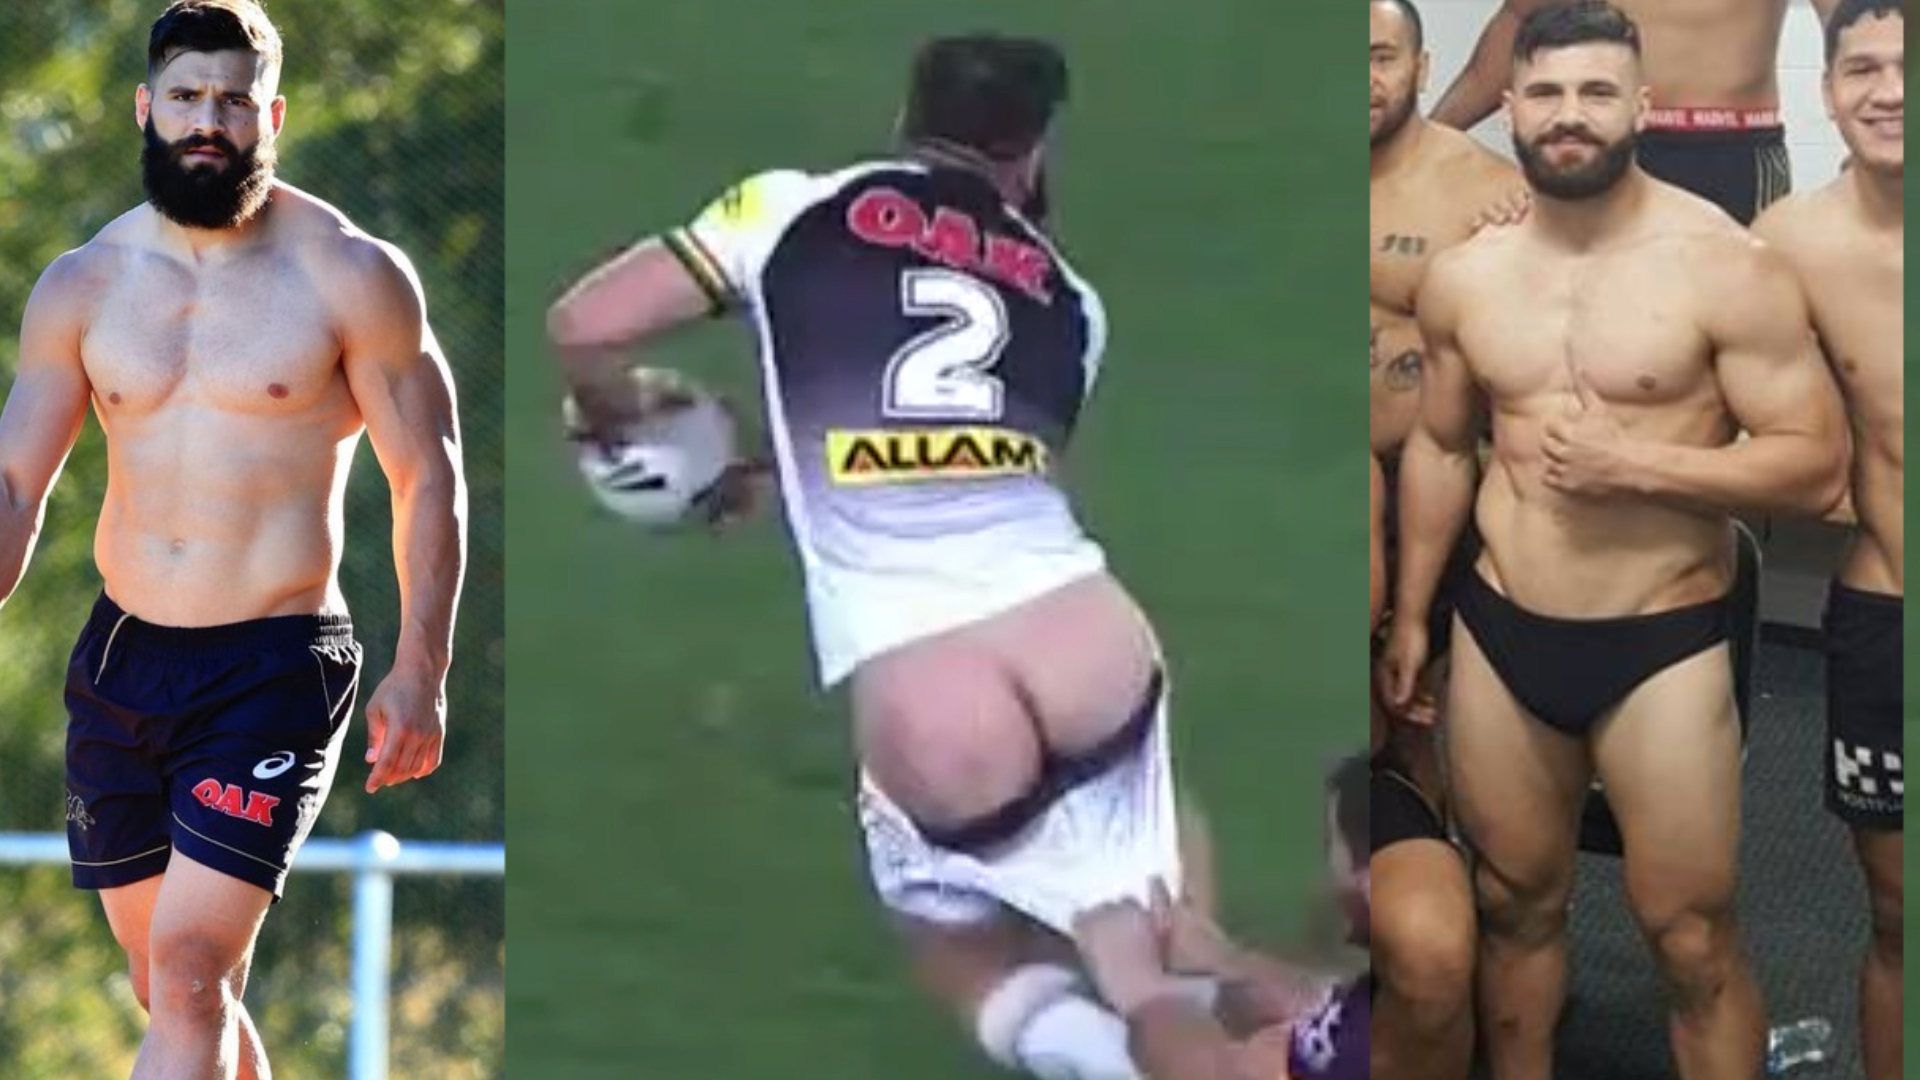 Rugby God's Muscle Ass Exposed During Match